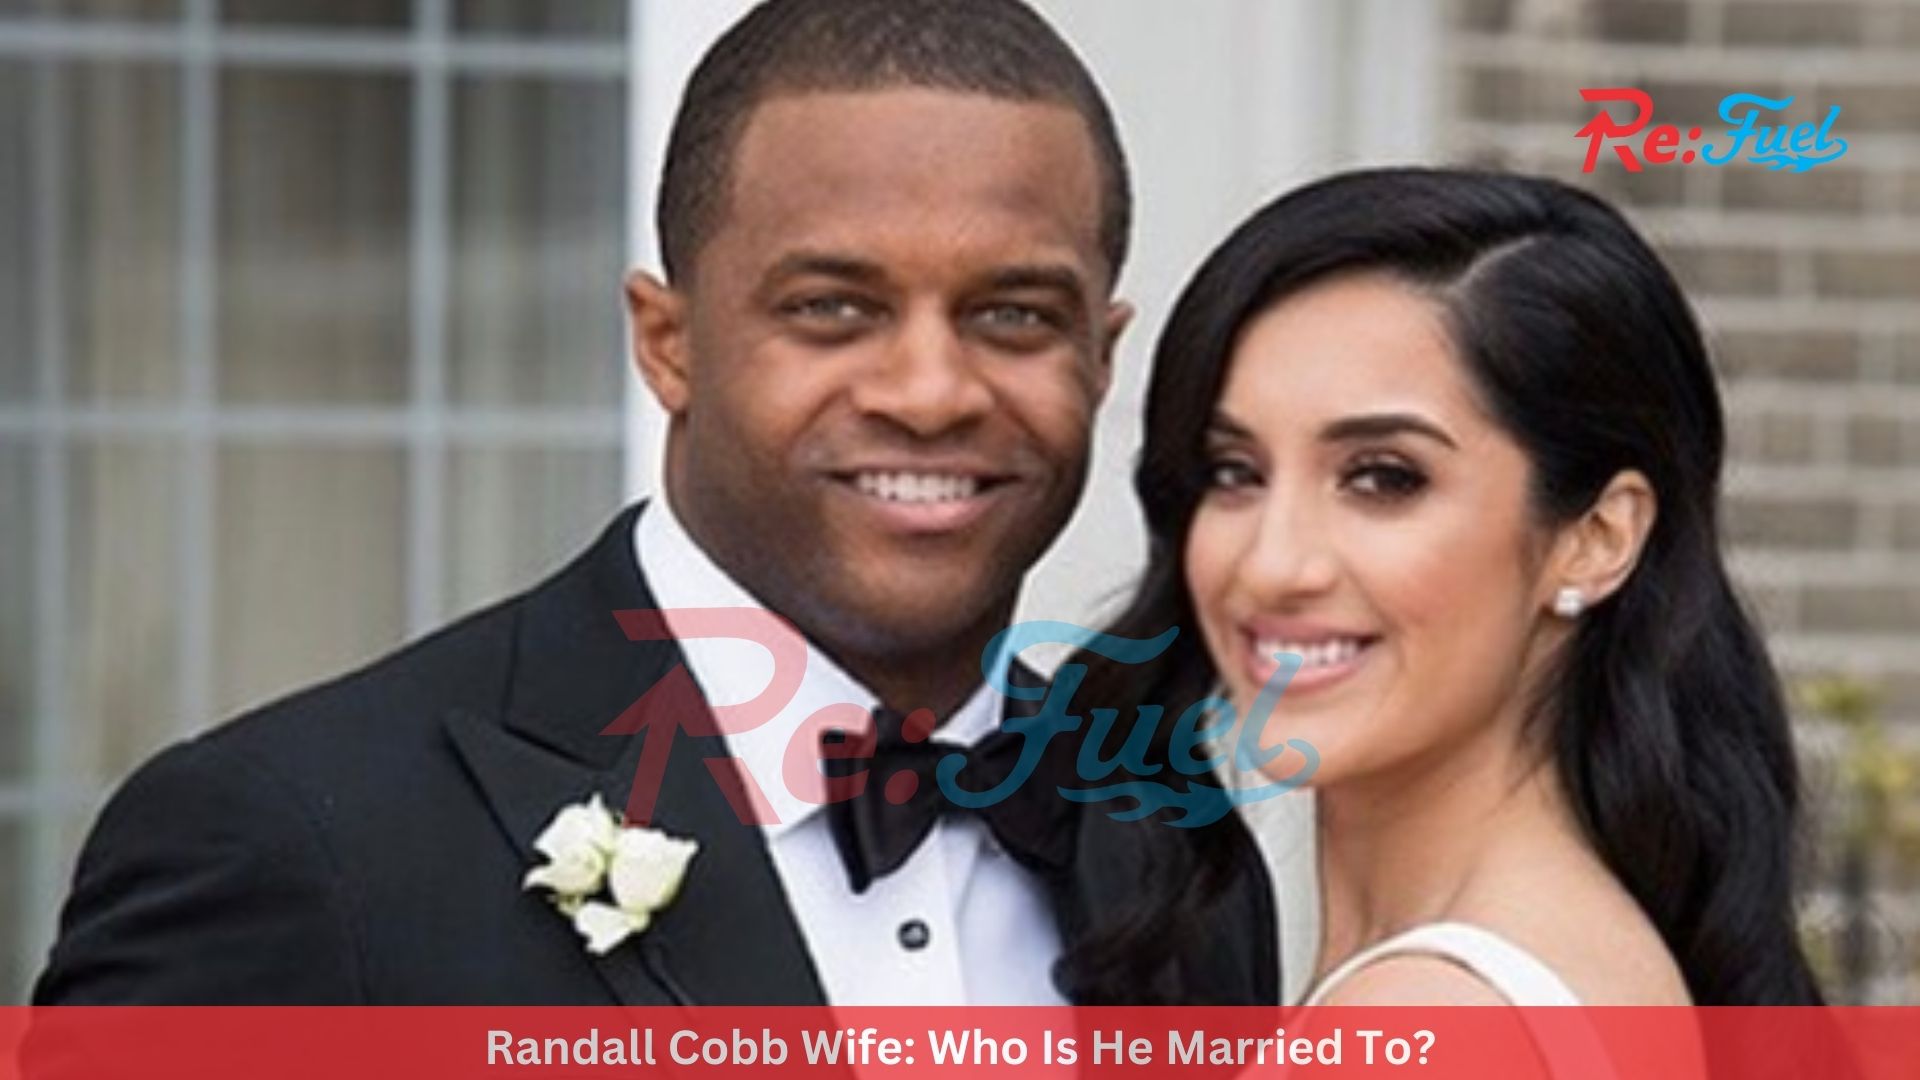 Randall Cobb Wife: Who Is He Married To?